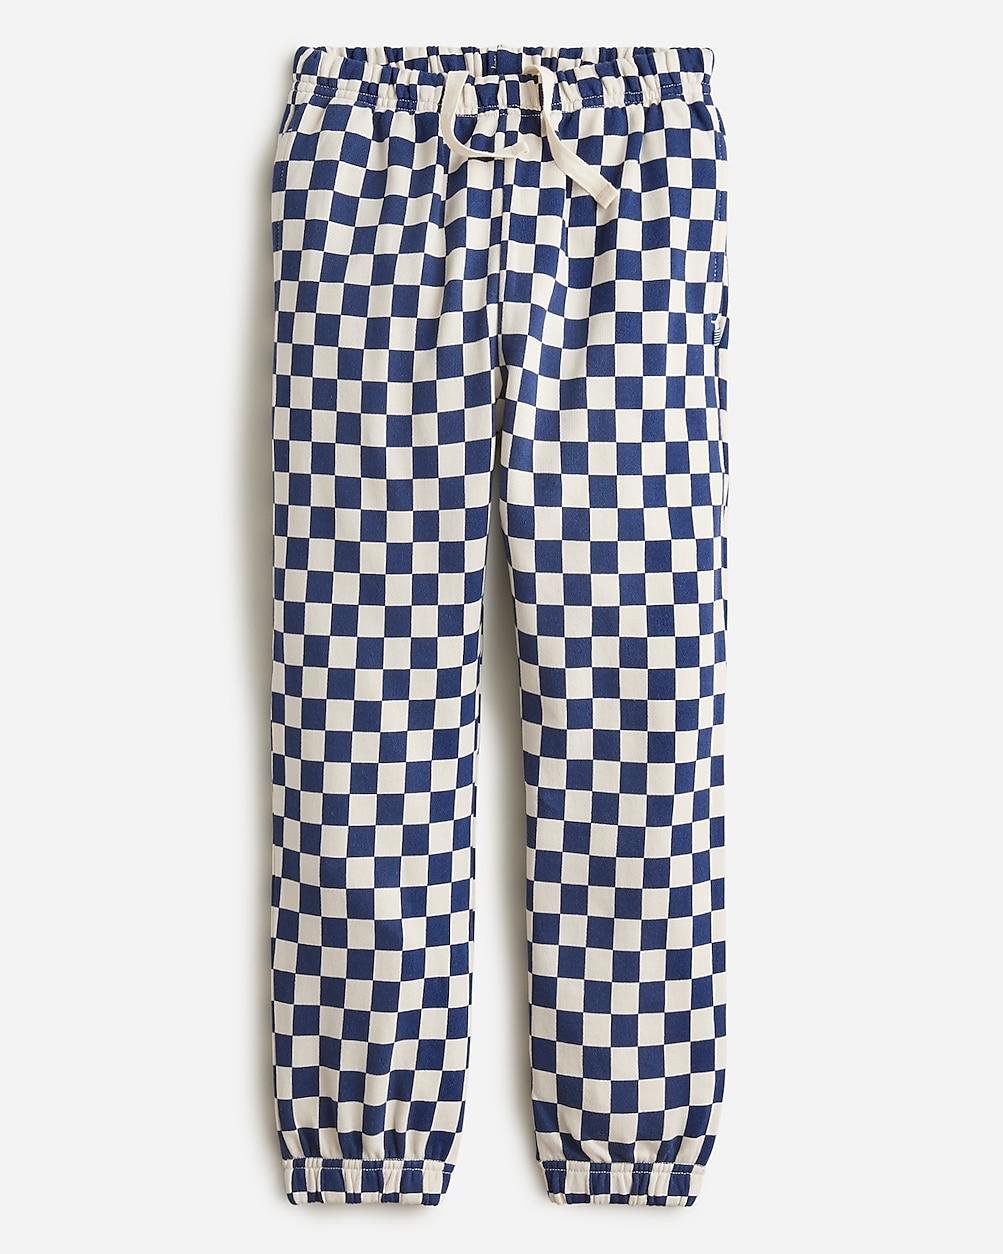 KID by Crewcuts garment-dyed sweatpant in checkerboard print by J.CREW